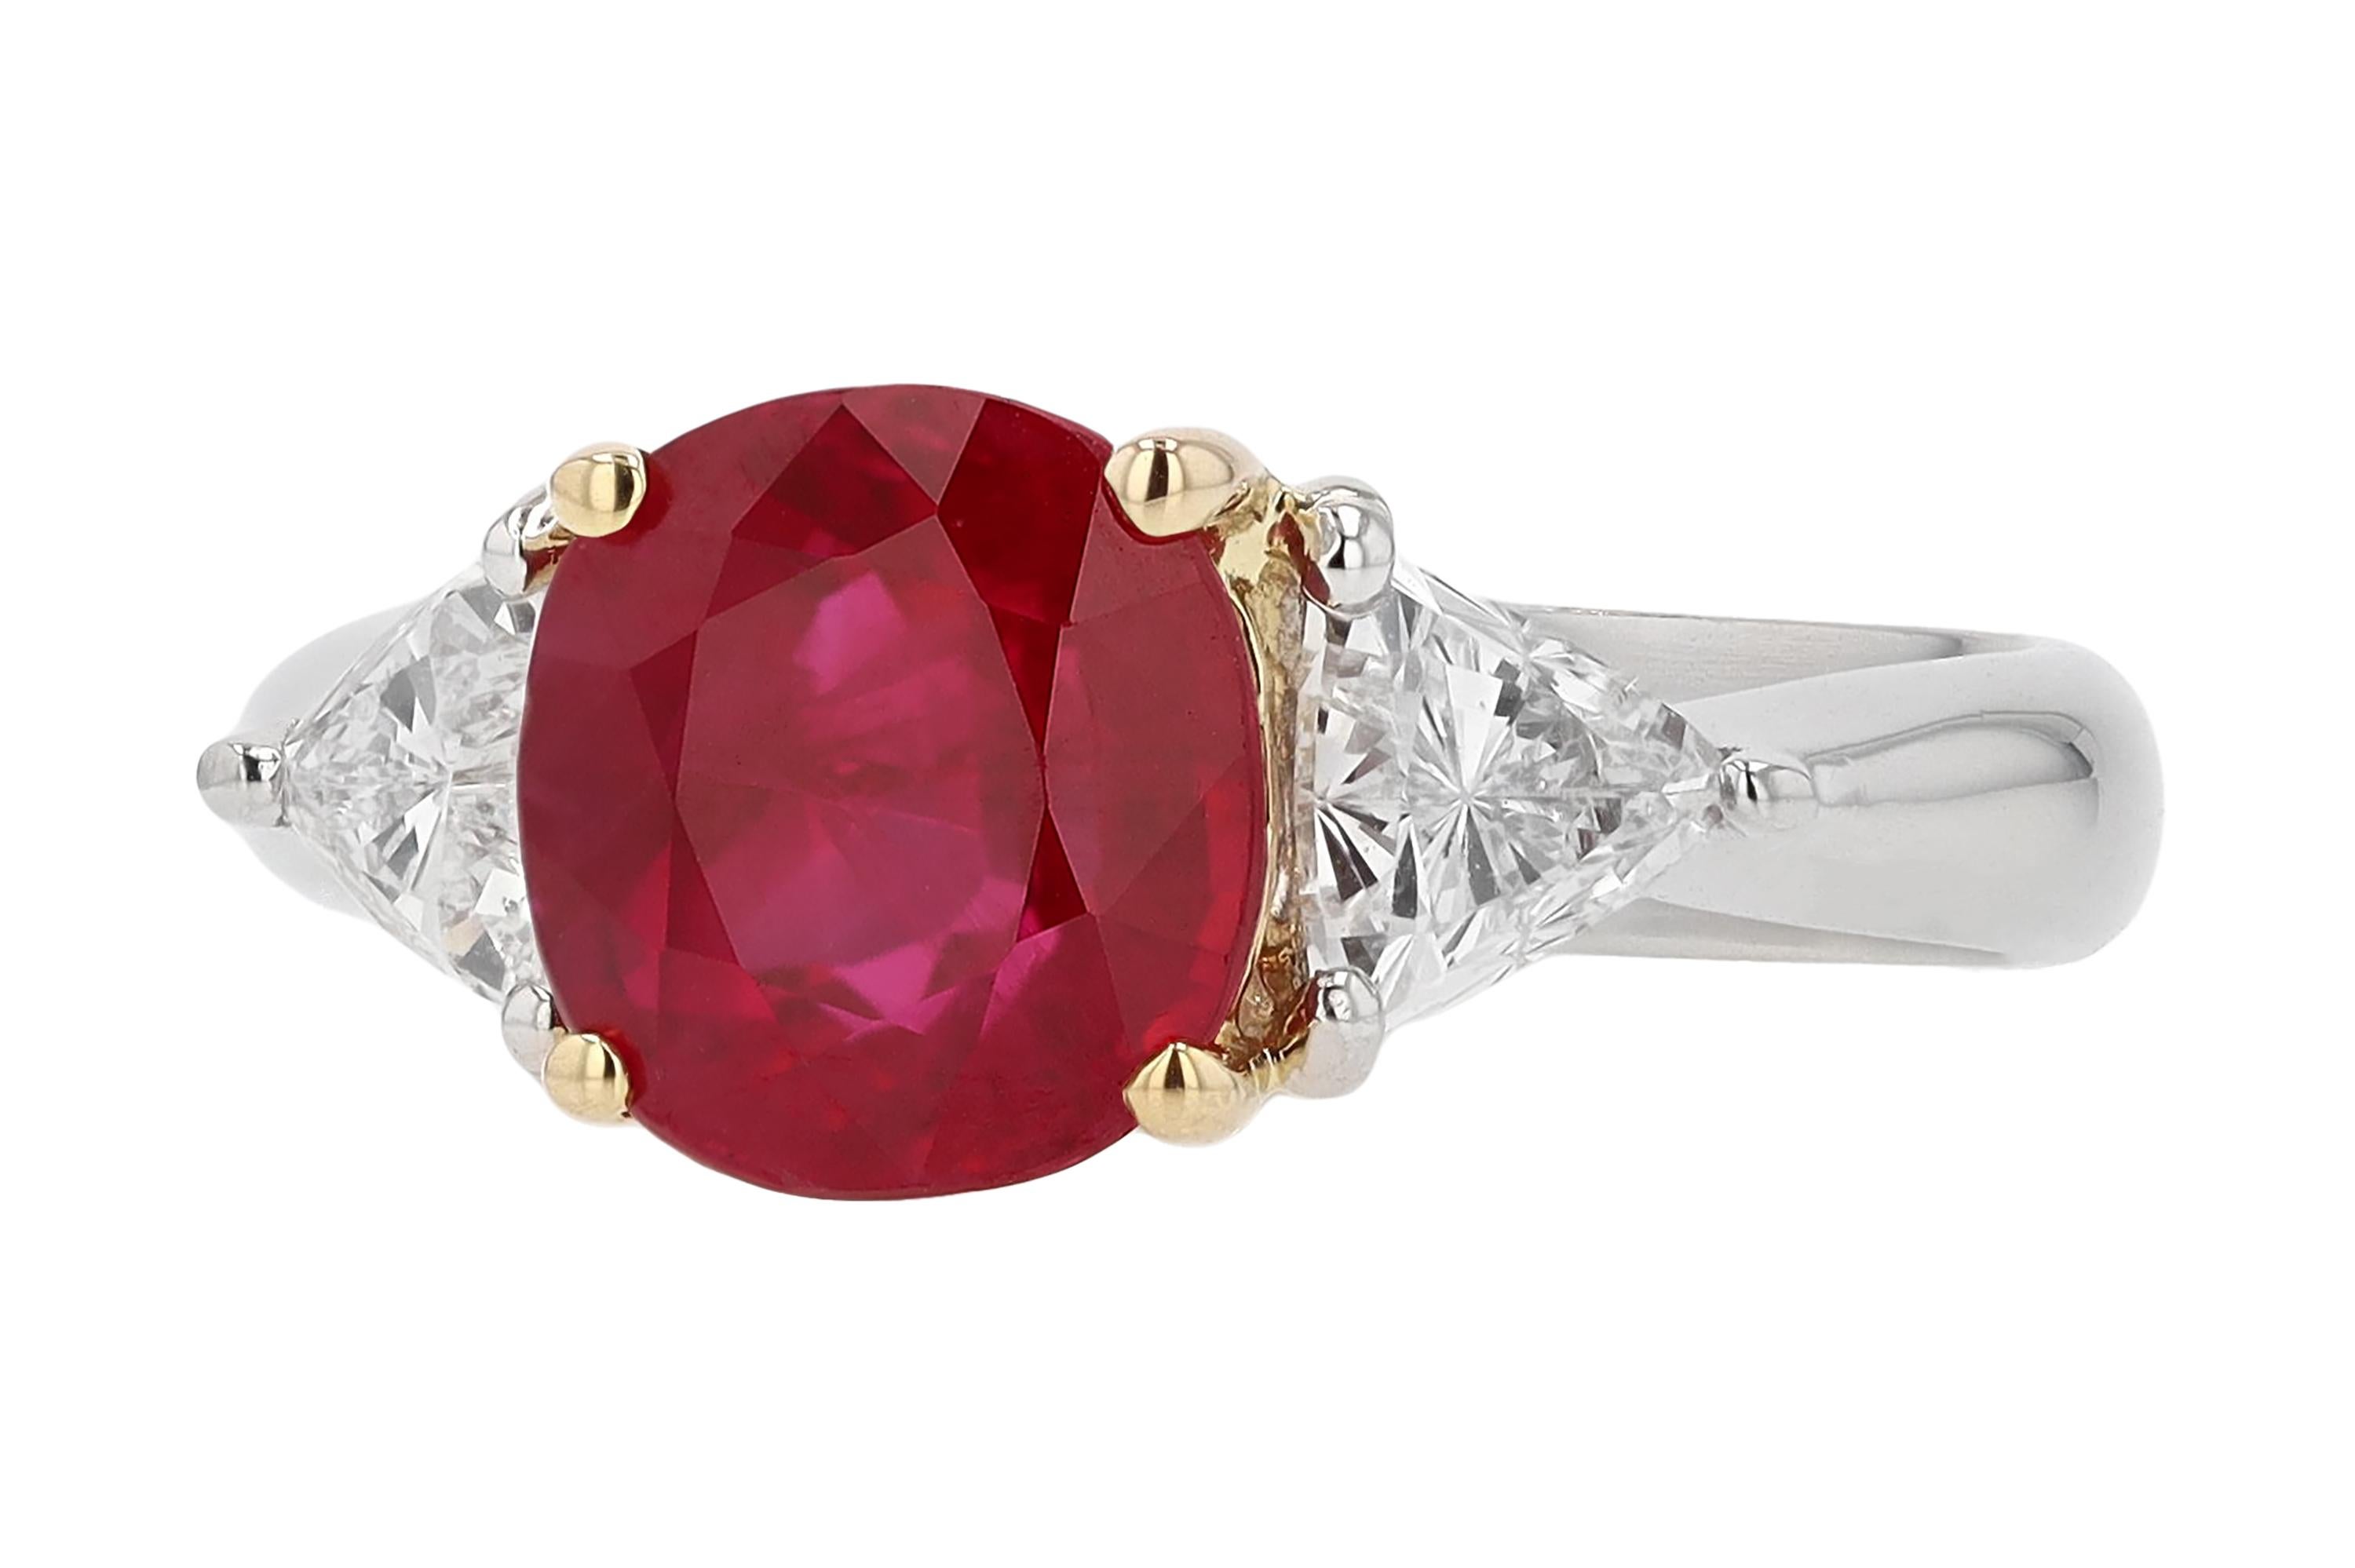 Contemporary GIA Certified 3 Carat Pigeon Blood Burma Ruby Engagement Ring